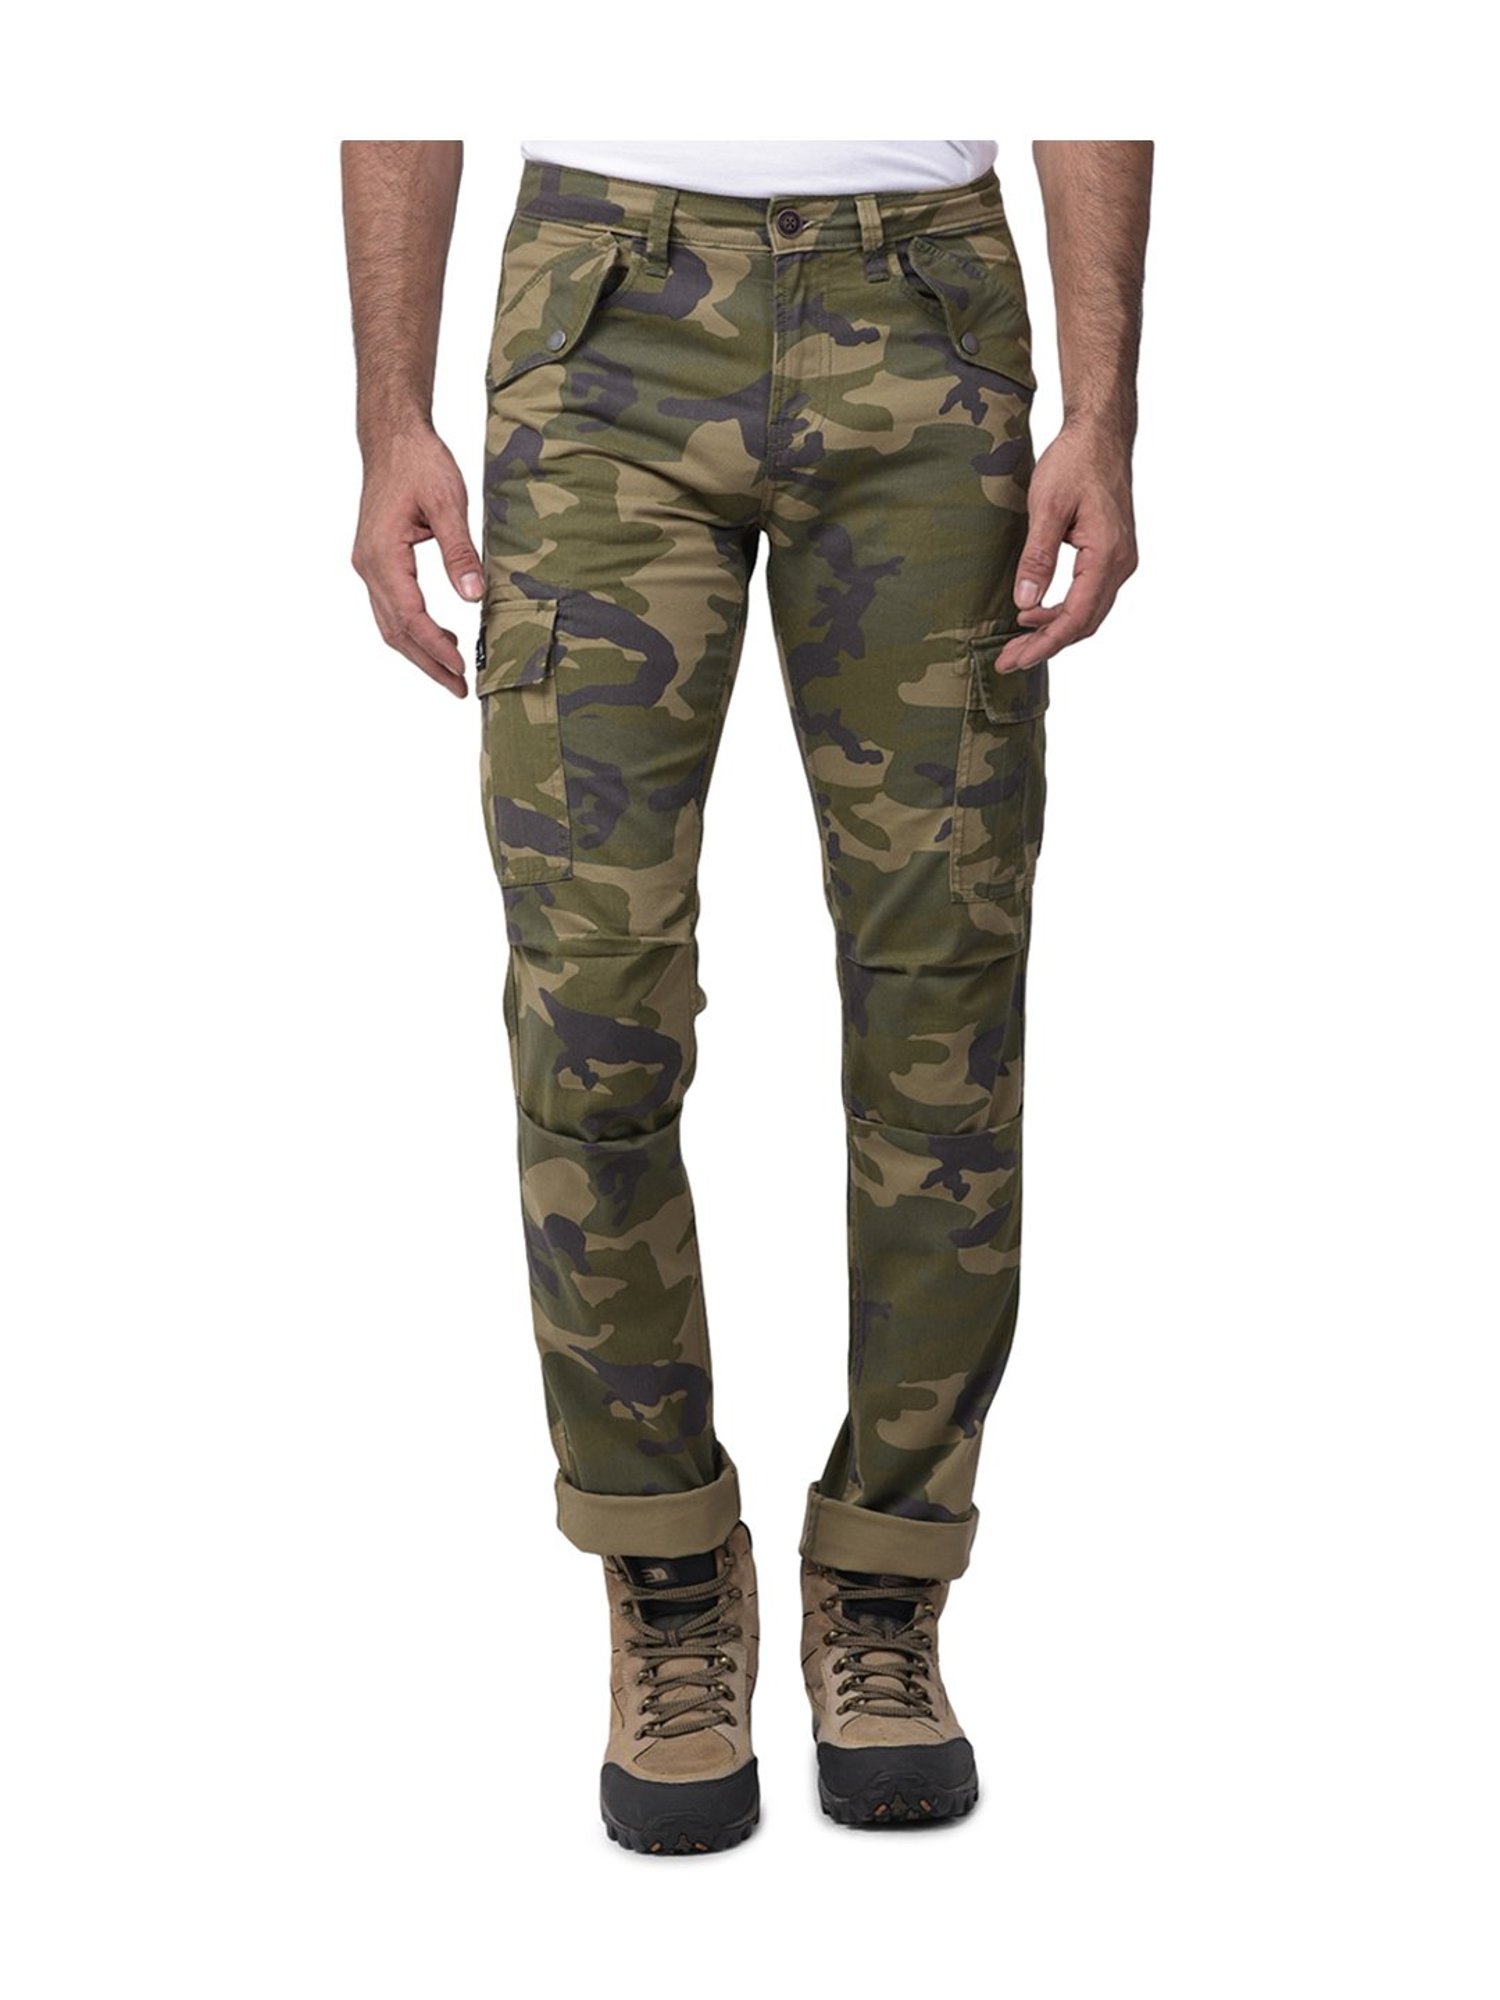 Buy myaddiction Quick Dry Mens Outdoor Woodland Cargo Pants Hiking Trousers  XL at Amazonin